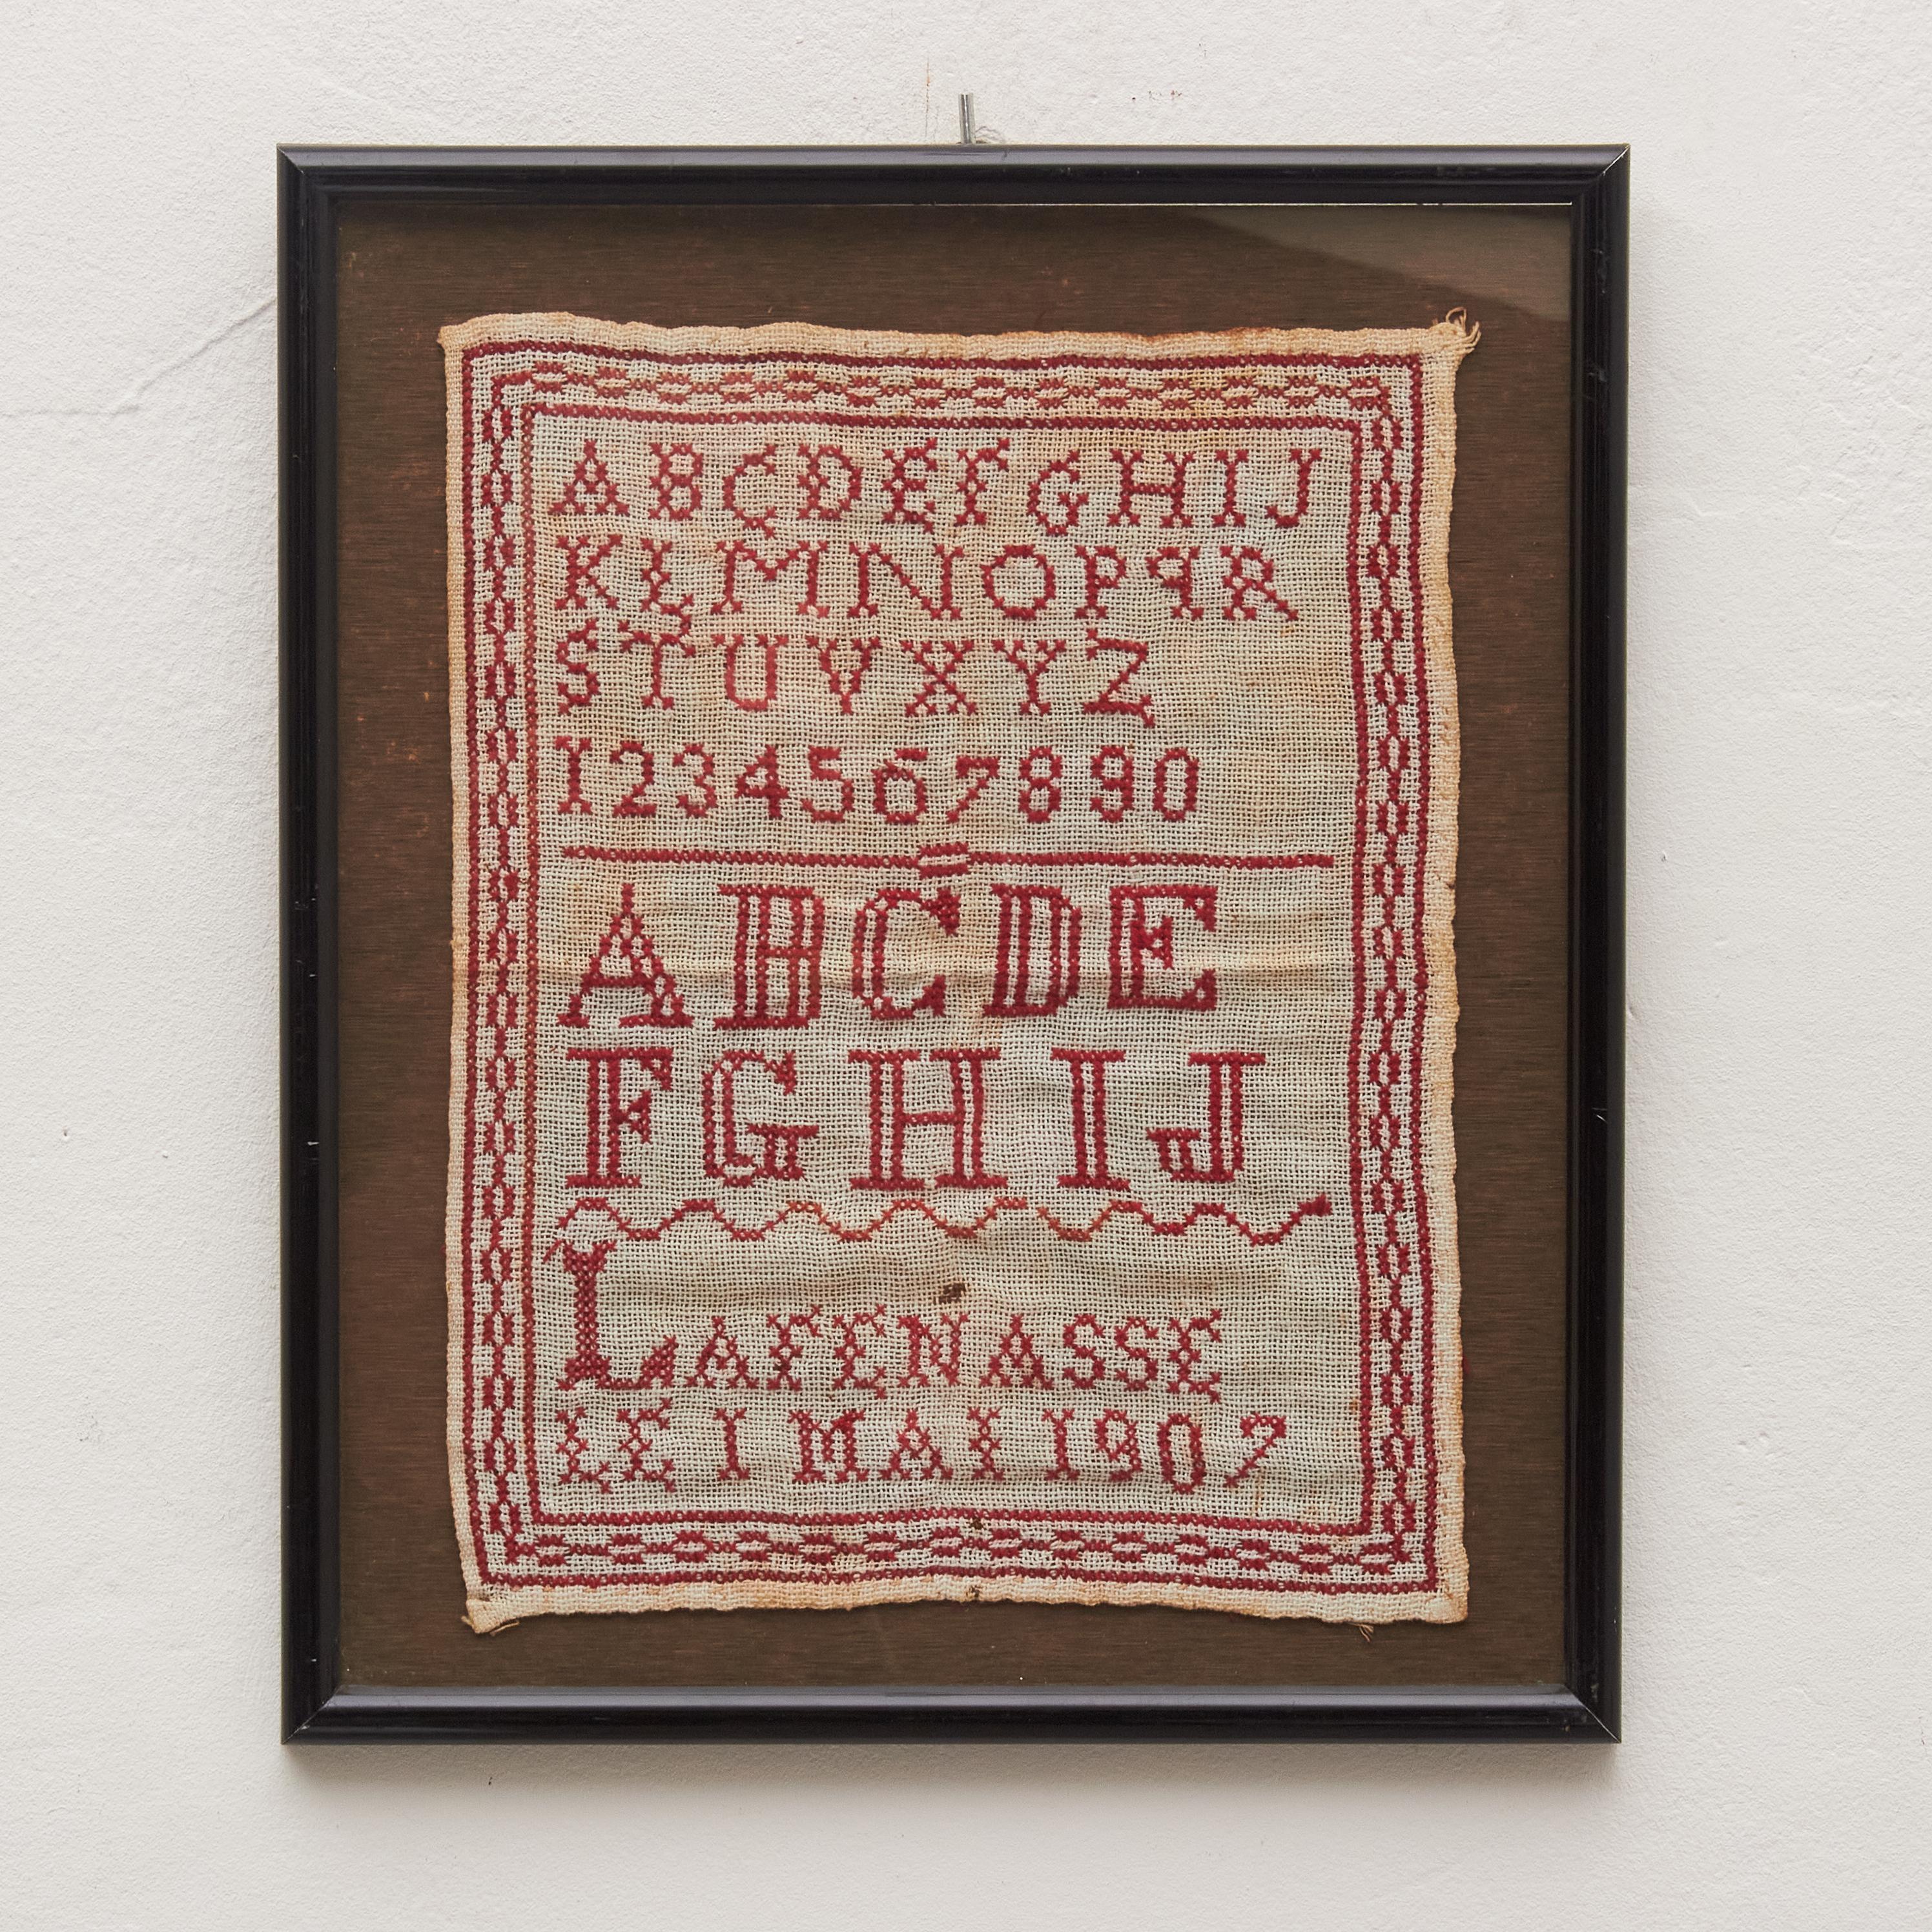 Transport yourself to a bygone era with our vintage cross-stitch sampler from the early 20th century. This timeless piece features a classic red-on-white design adorned with meticulously crafted alphabet letters, numbers, and an enchanting border